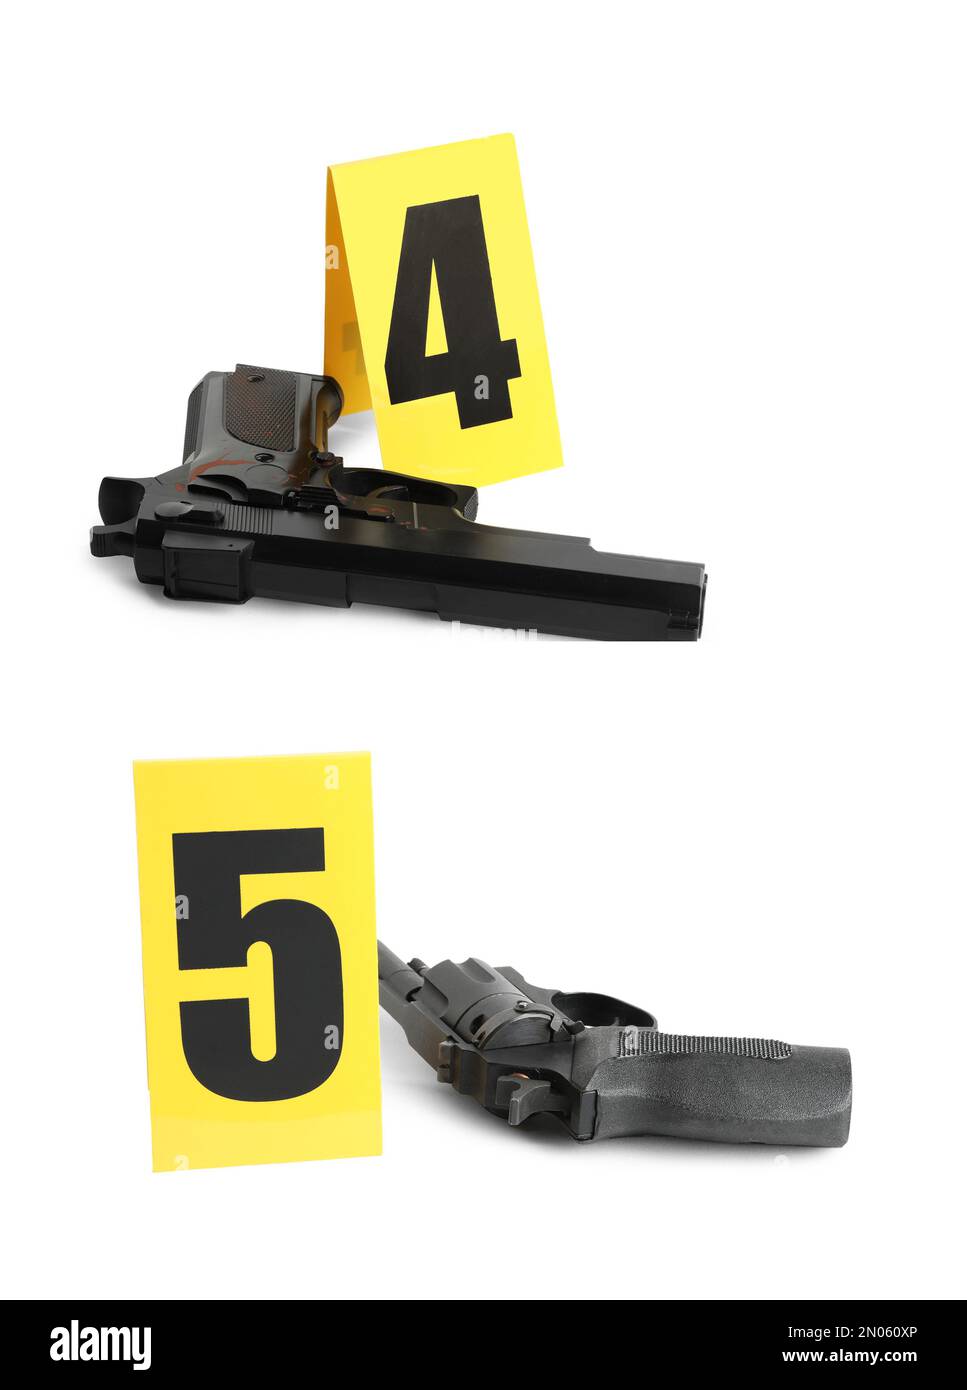 Crime scene investigation. Evidence identification markers and guns on white background Stock Photo